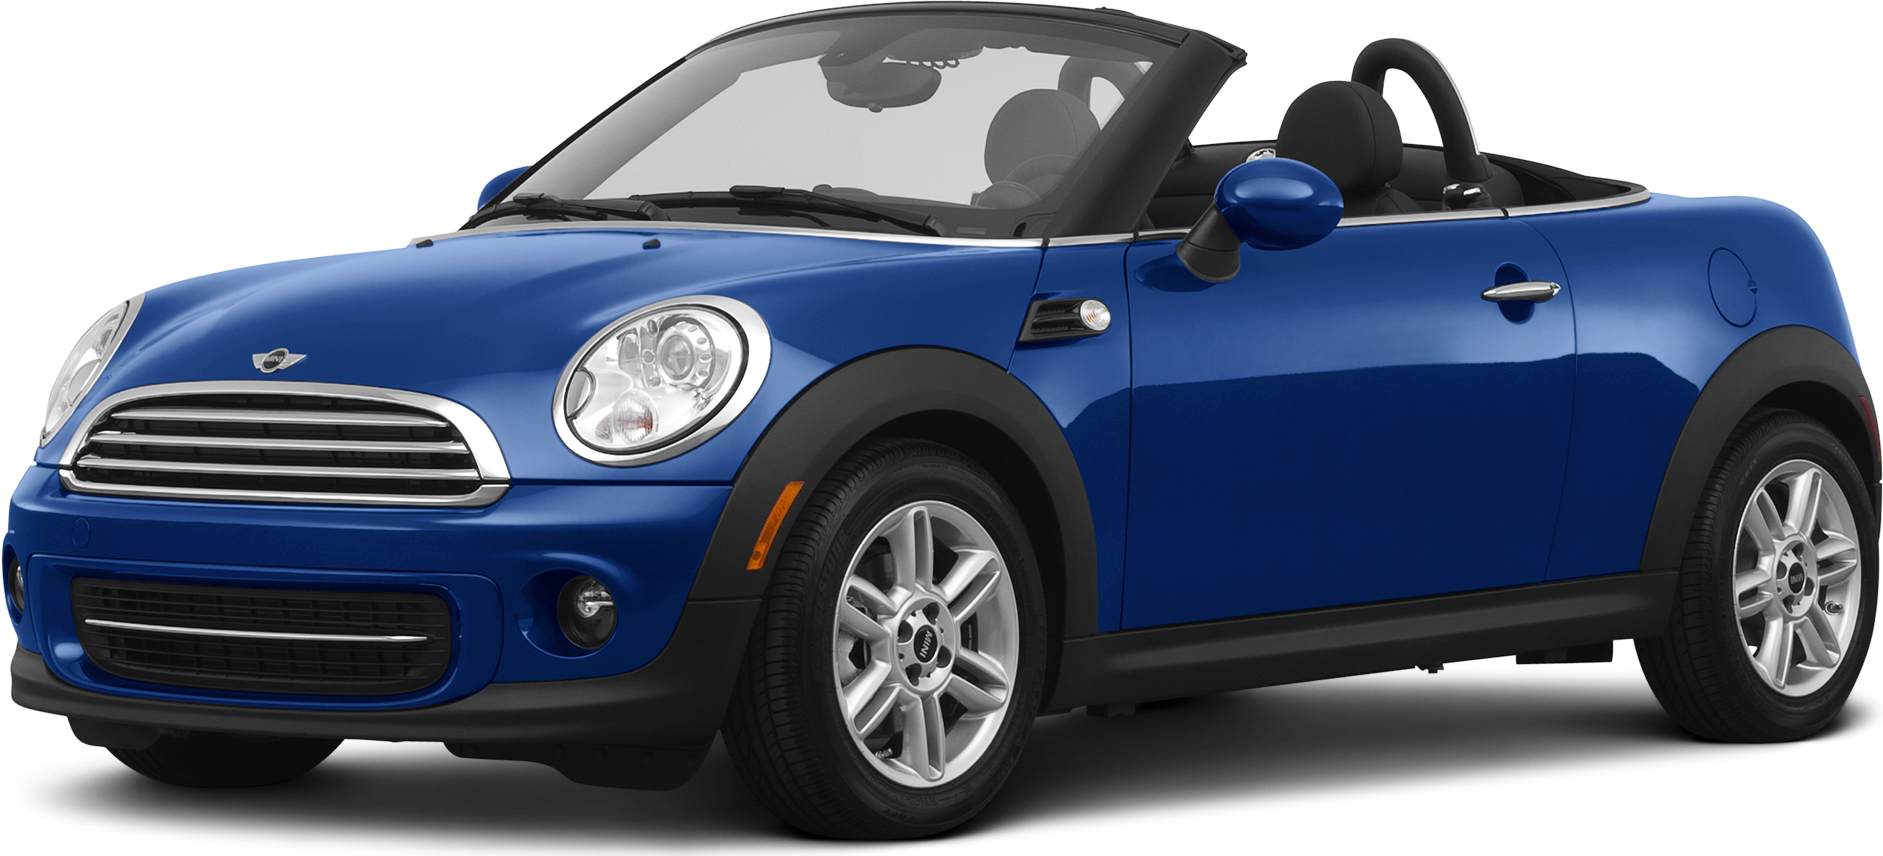 Overview & Drive of the 2015 Mini Cooper S Roadster - R59 